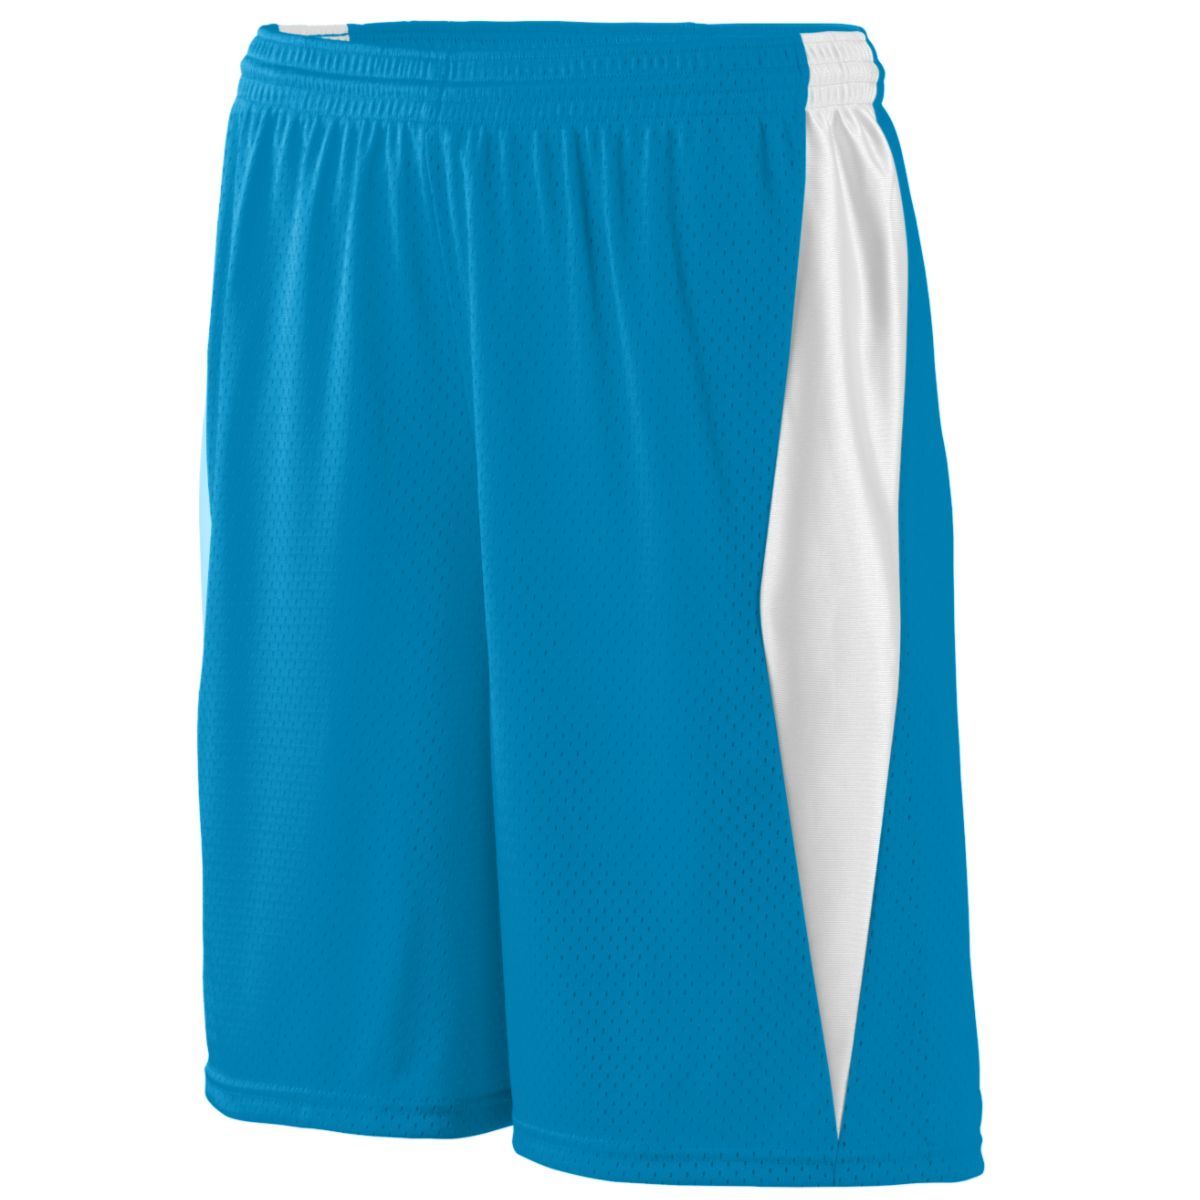 Augusta Sportswear Top Score Shorts in Power Blue/White  -Part of the Adult, Adult-Shorts, Augusta-Products, Lacrosse, All-Sports, All-Sports-1 product lines at KanaleyCreations.com